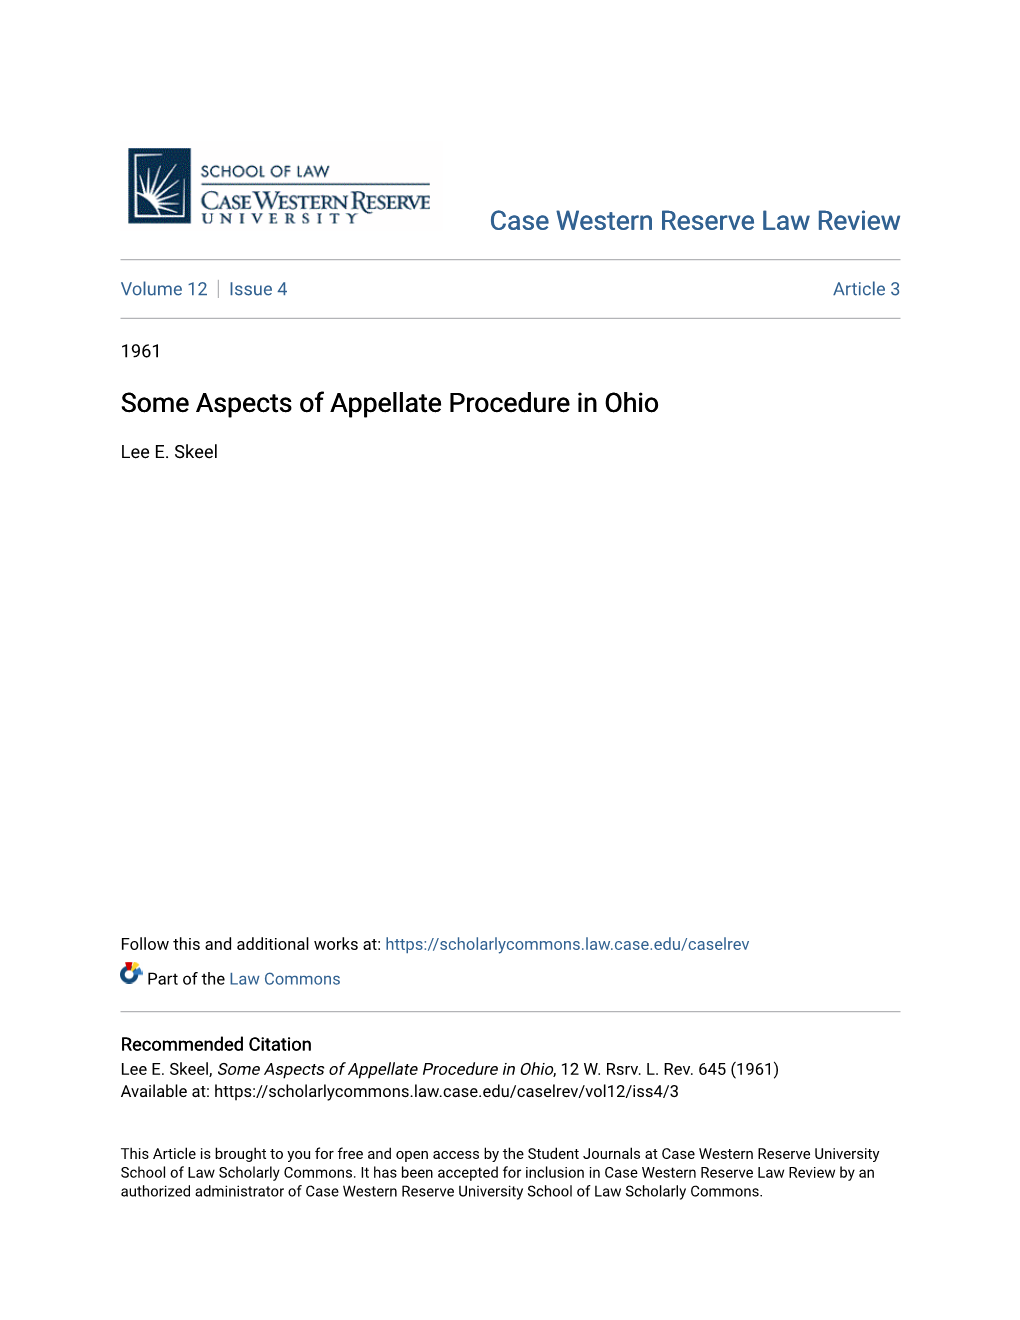 Some Aspects of Appellate Procedure in Ohio